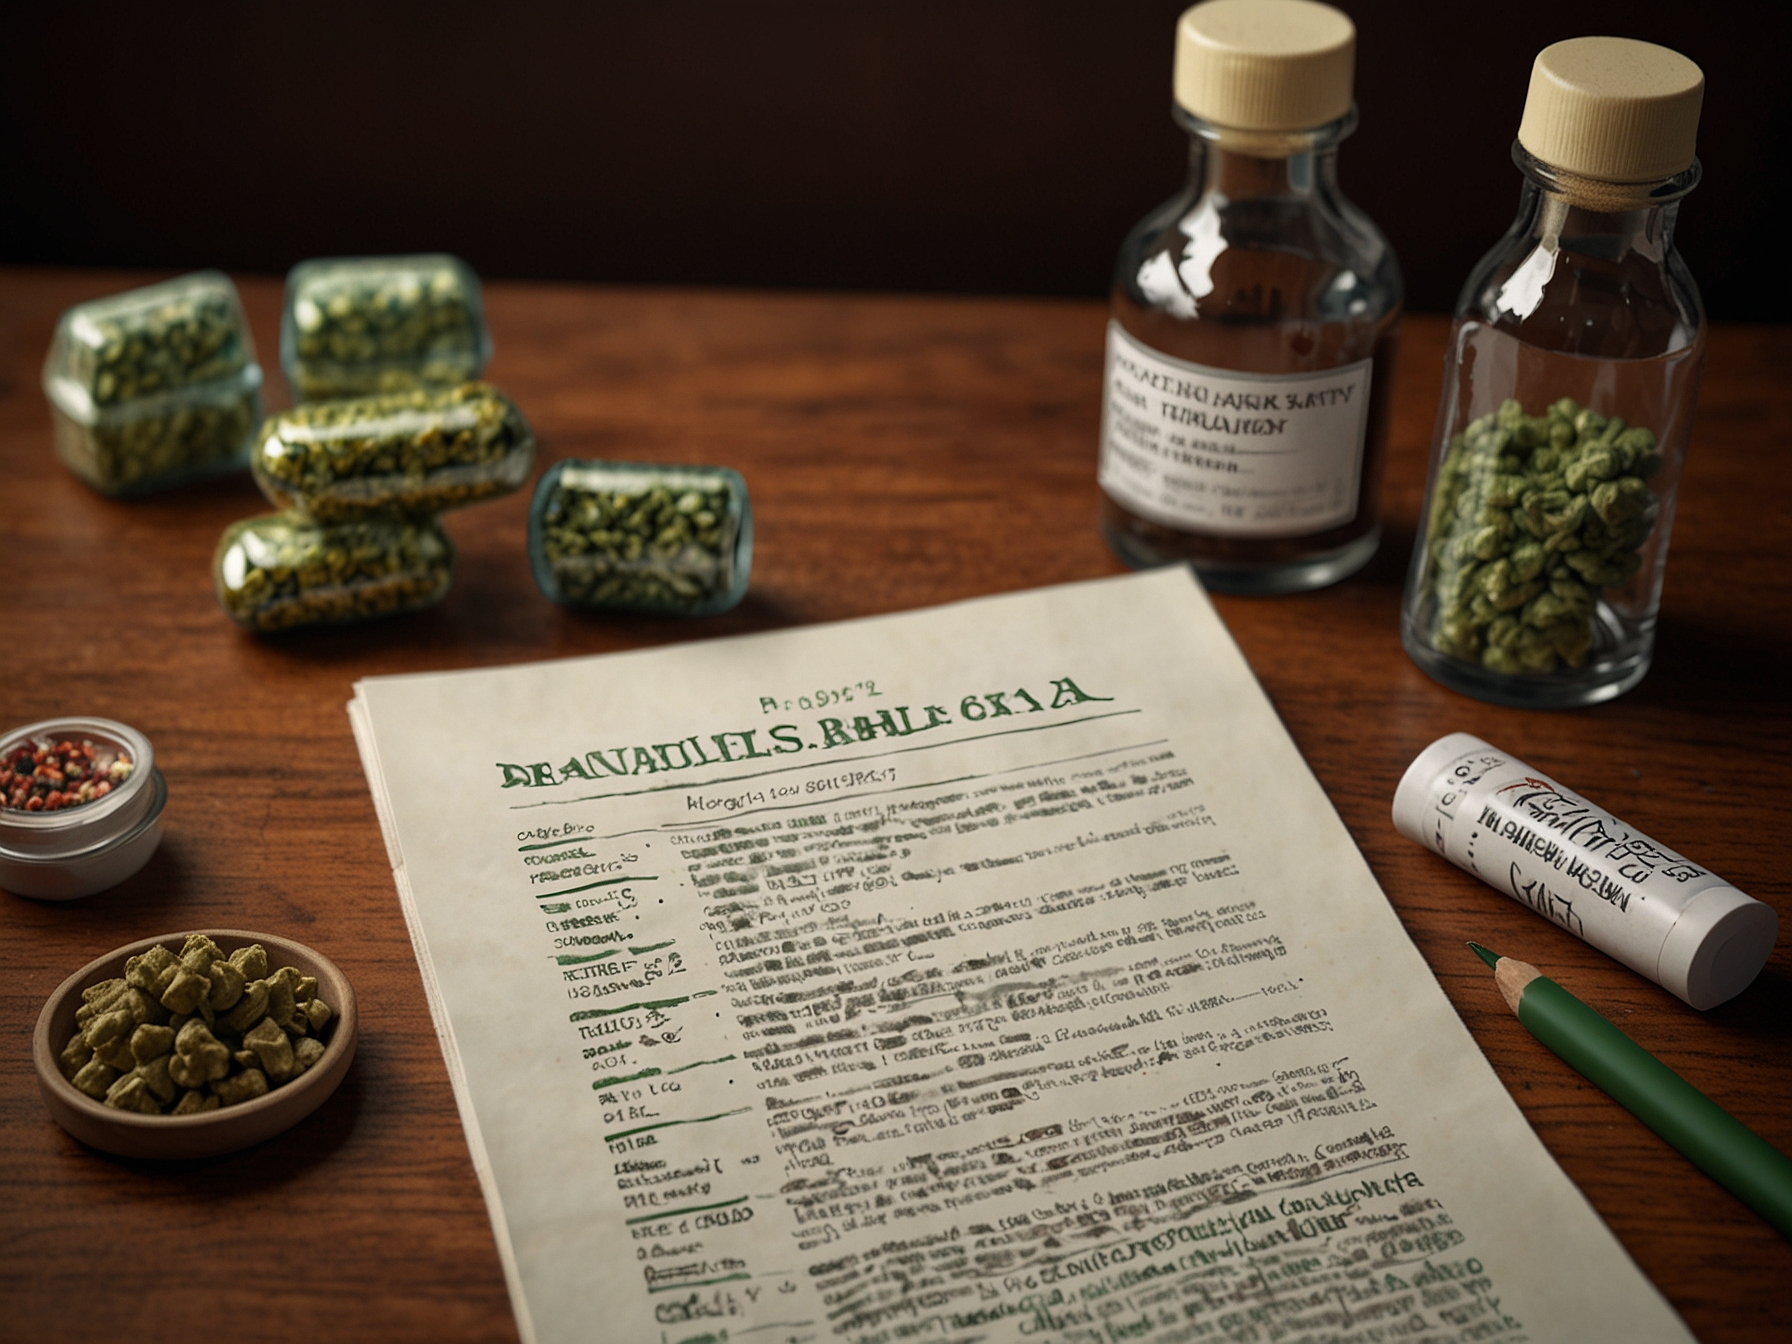 A graphic illustrating the health risks and legal ramifications of unregulated THC product sales in Nebraska, highlighting the Attorney General's commitment to community safety.